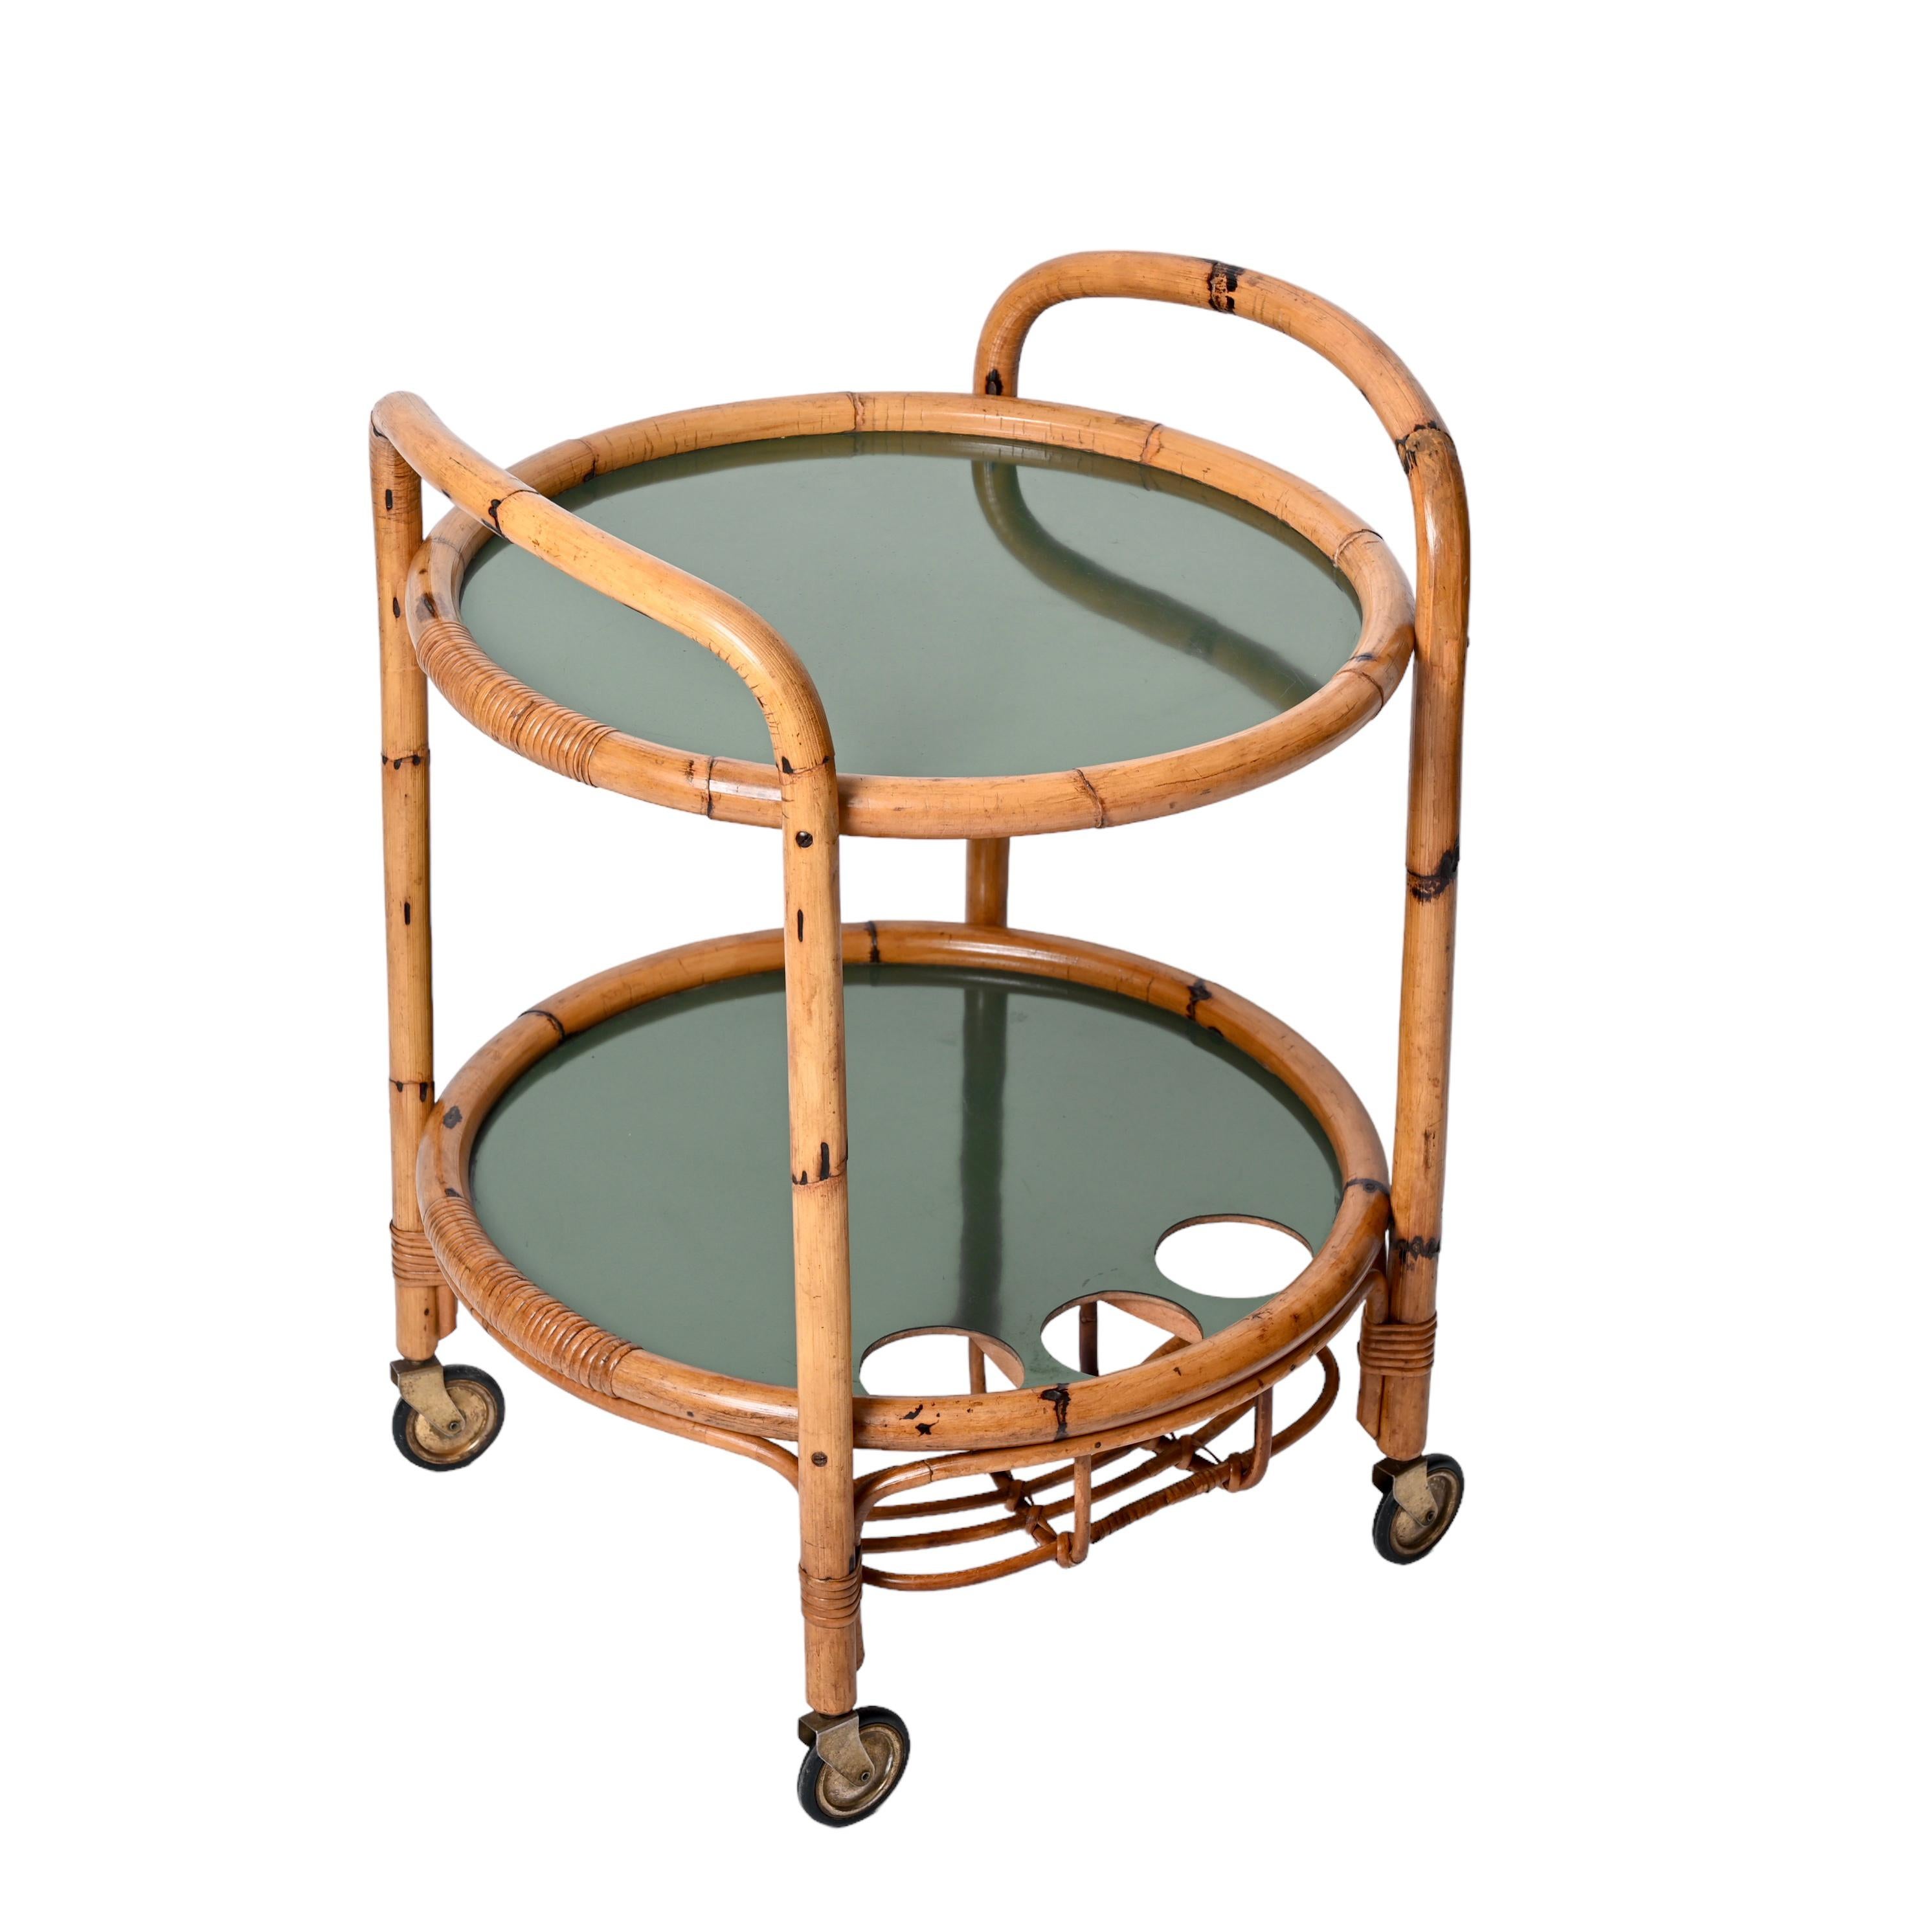 Midcentury Bar Serving Cart in Bamboo, Rattan and Green Formica, Italy, 1970s For Sale 10